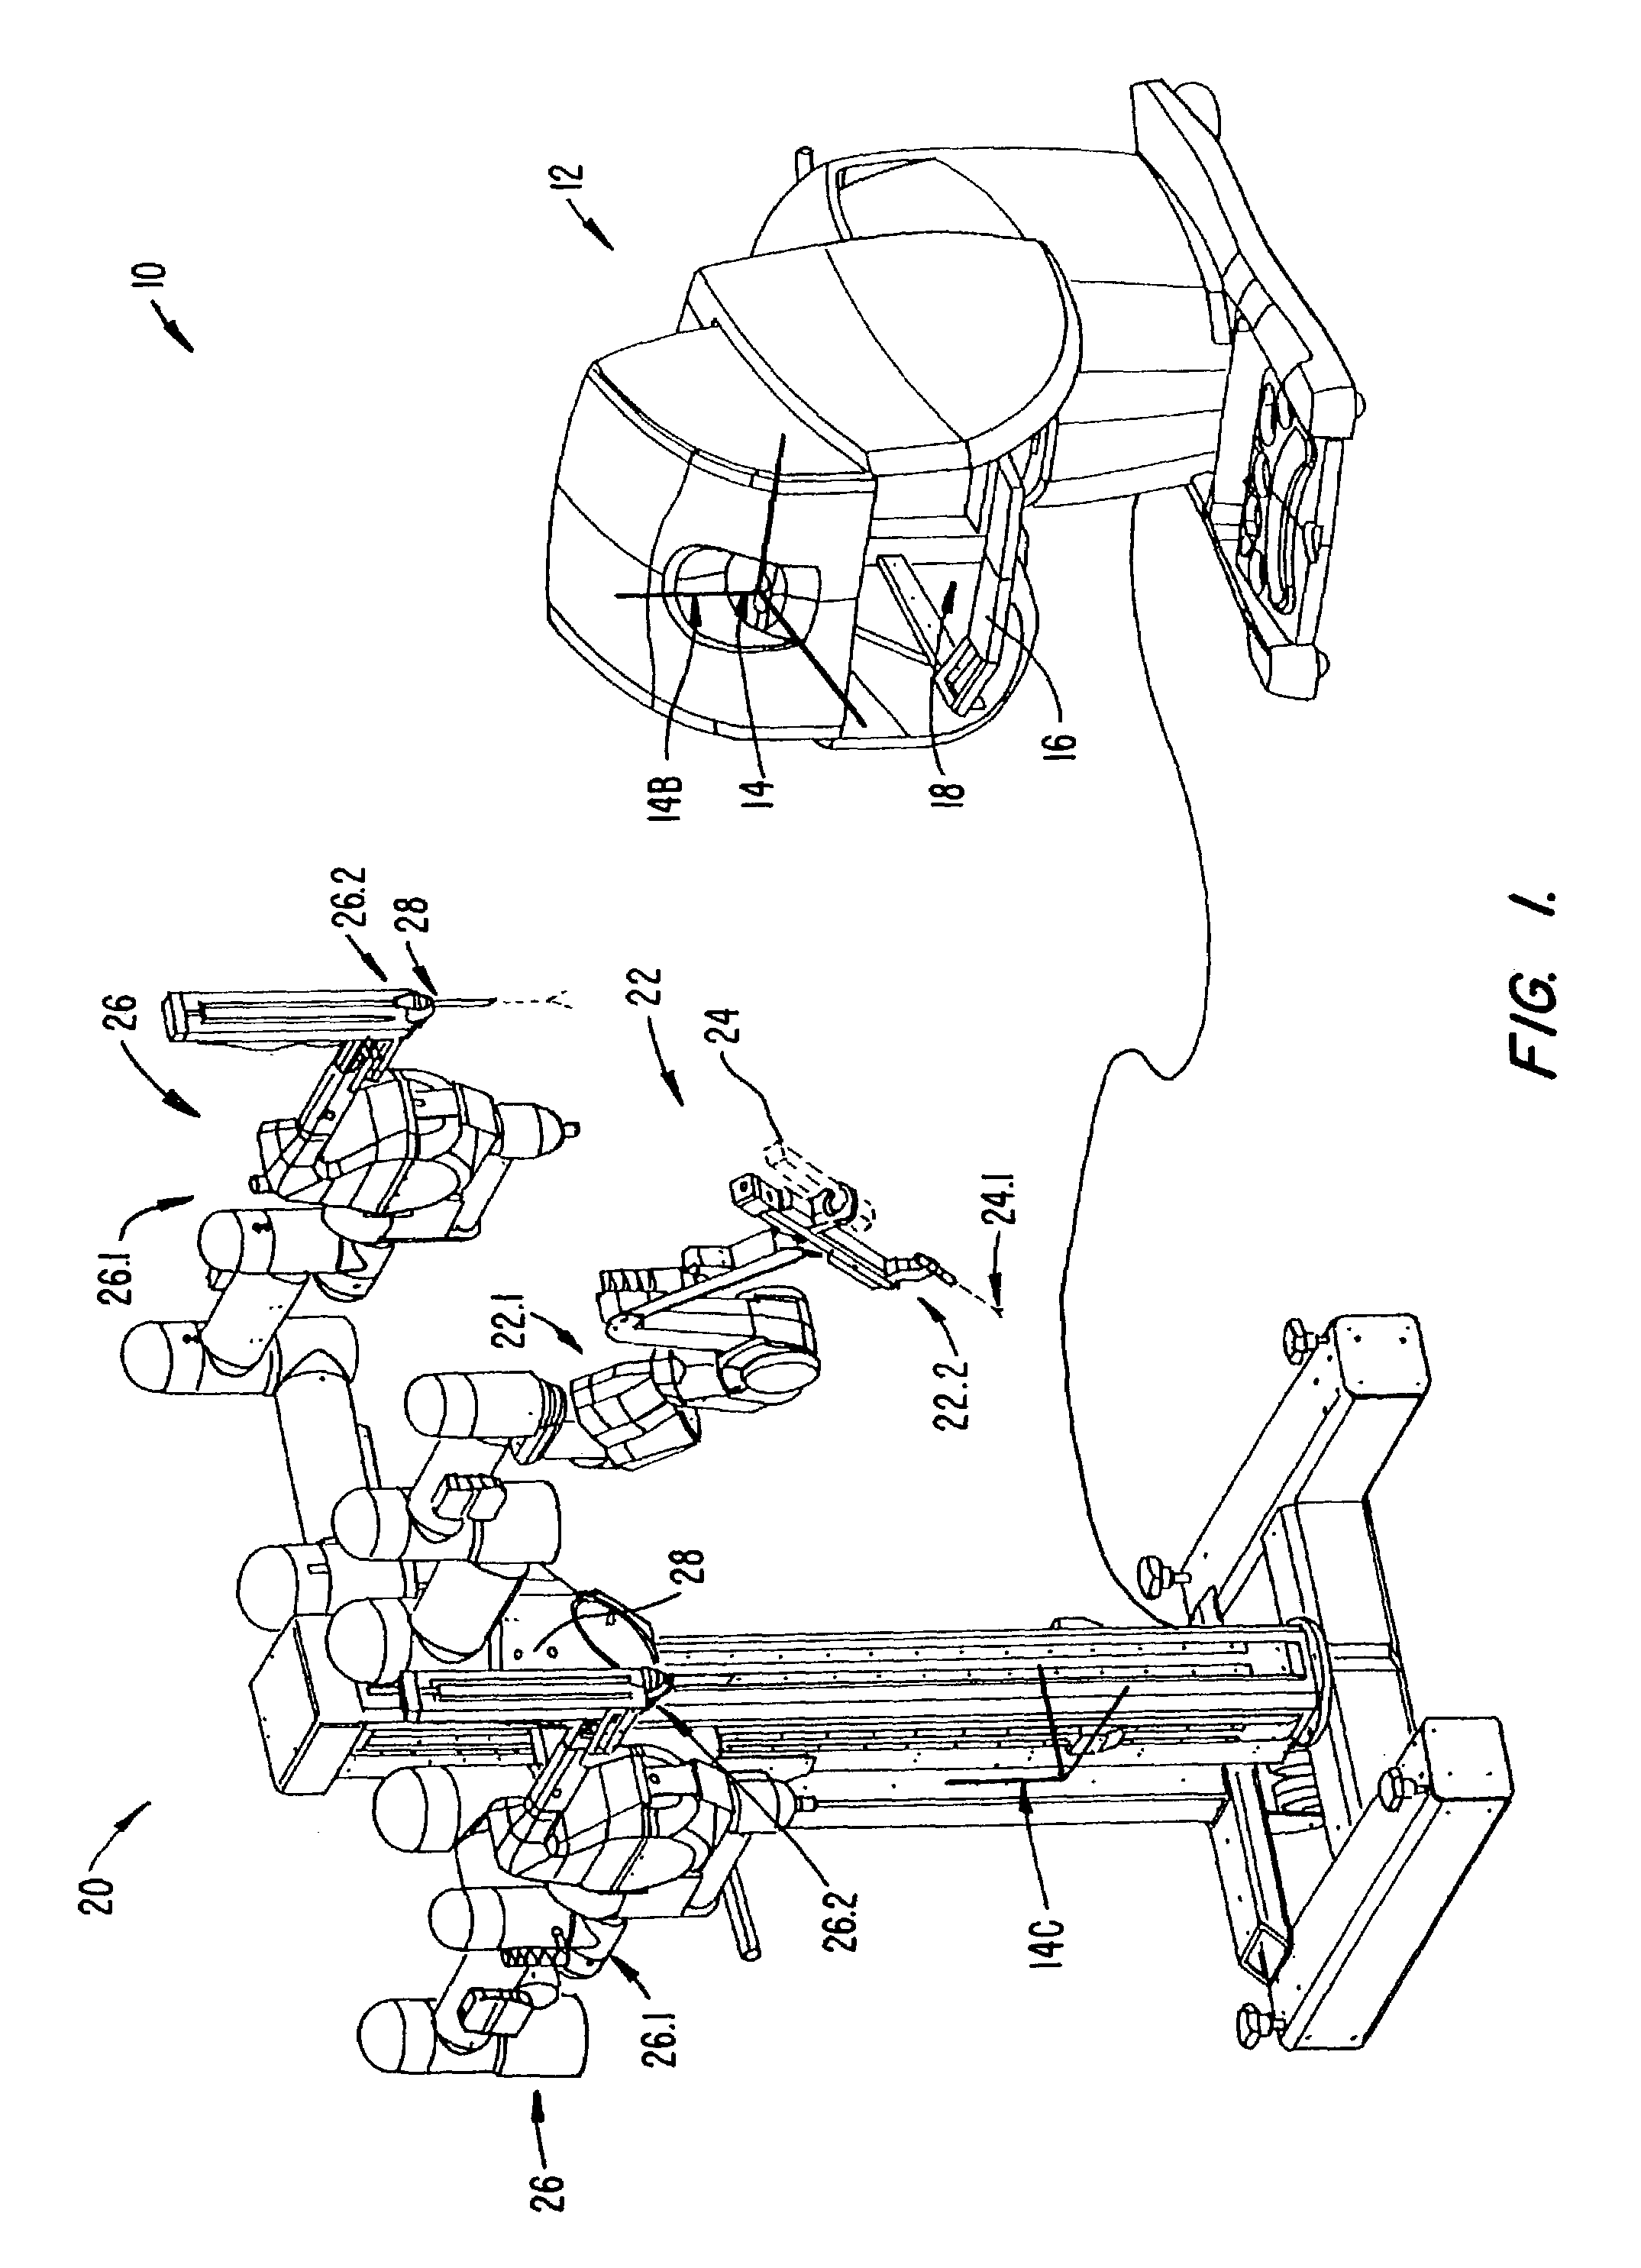 Image shifting apparatus and method for a telerobotic system